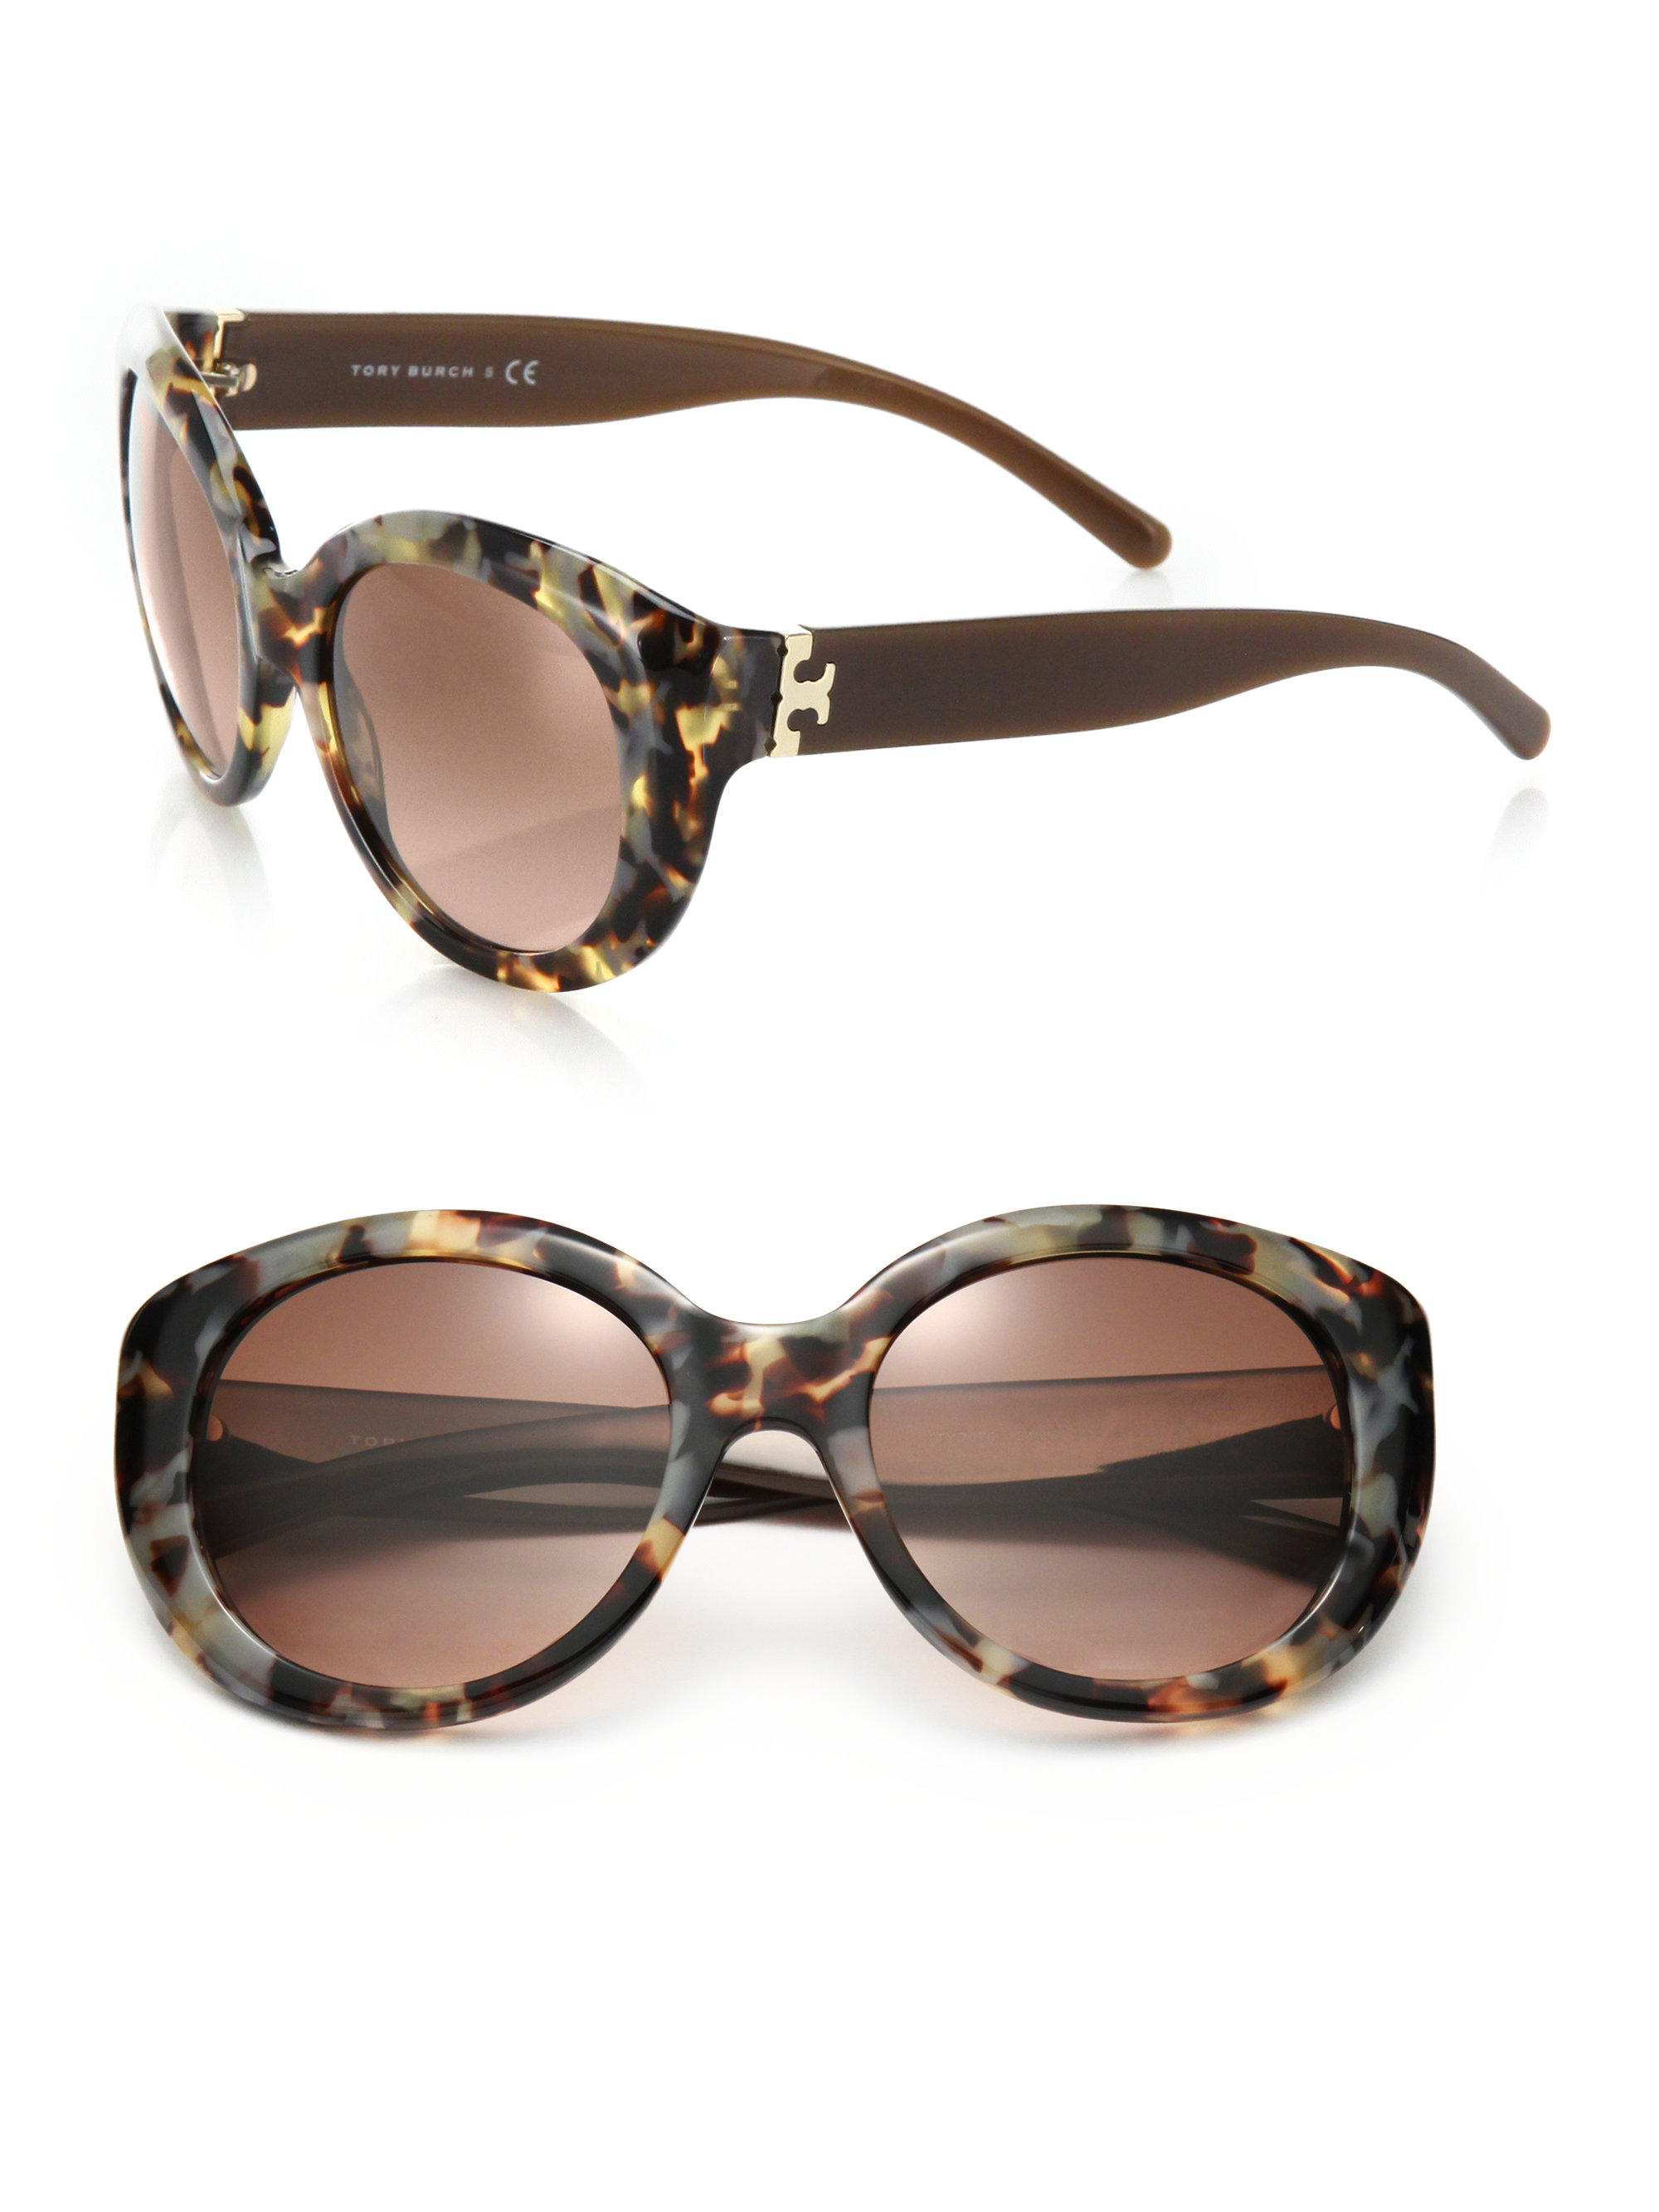 Lyst - Tory Burch Oversized 54mm Round Sunglasses in Brown